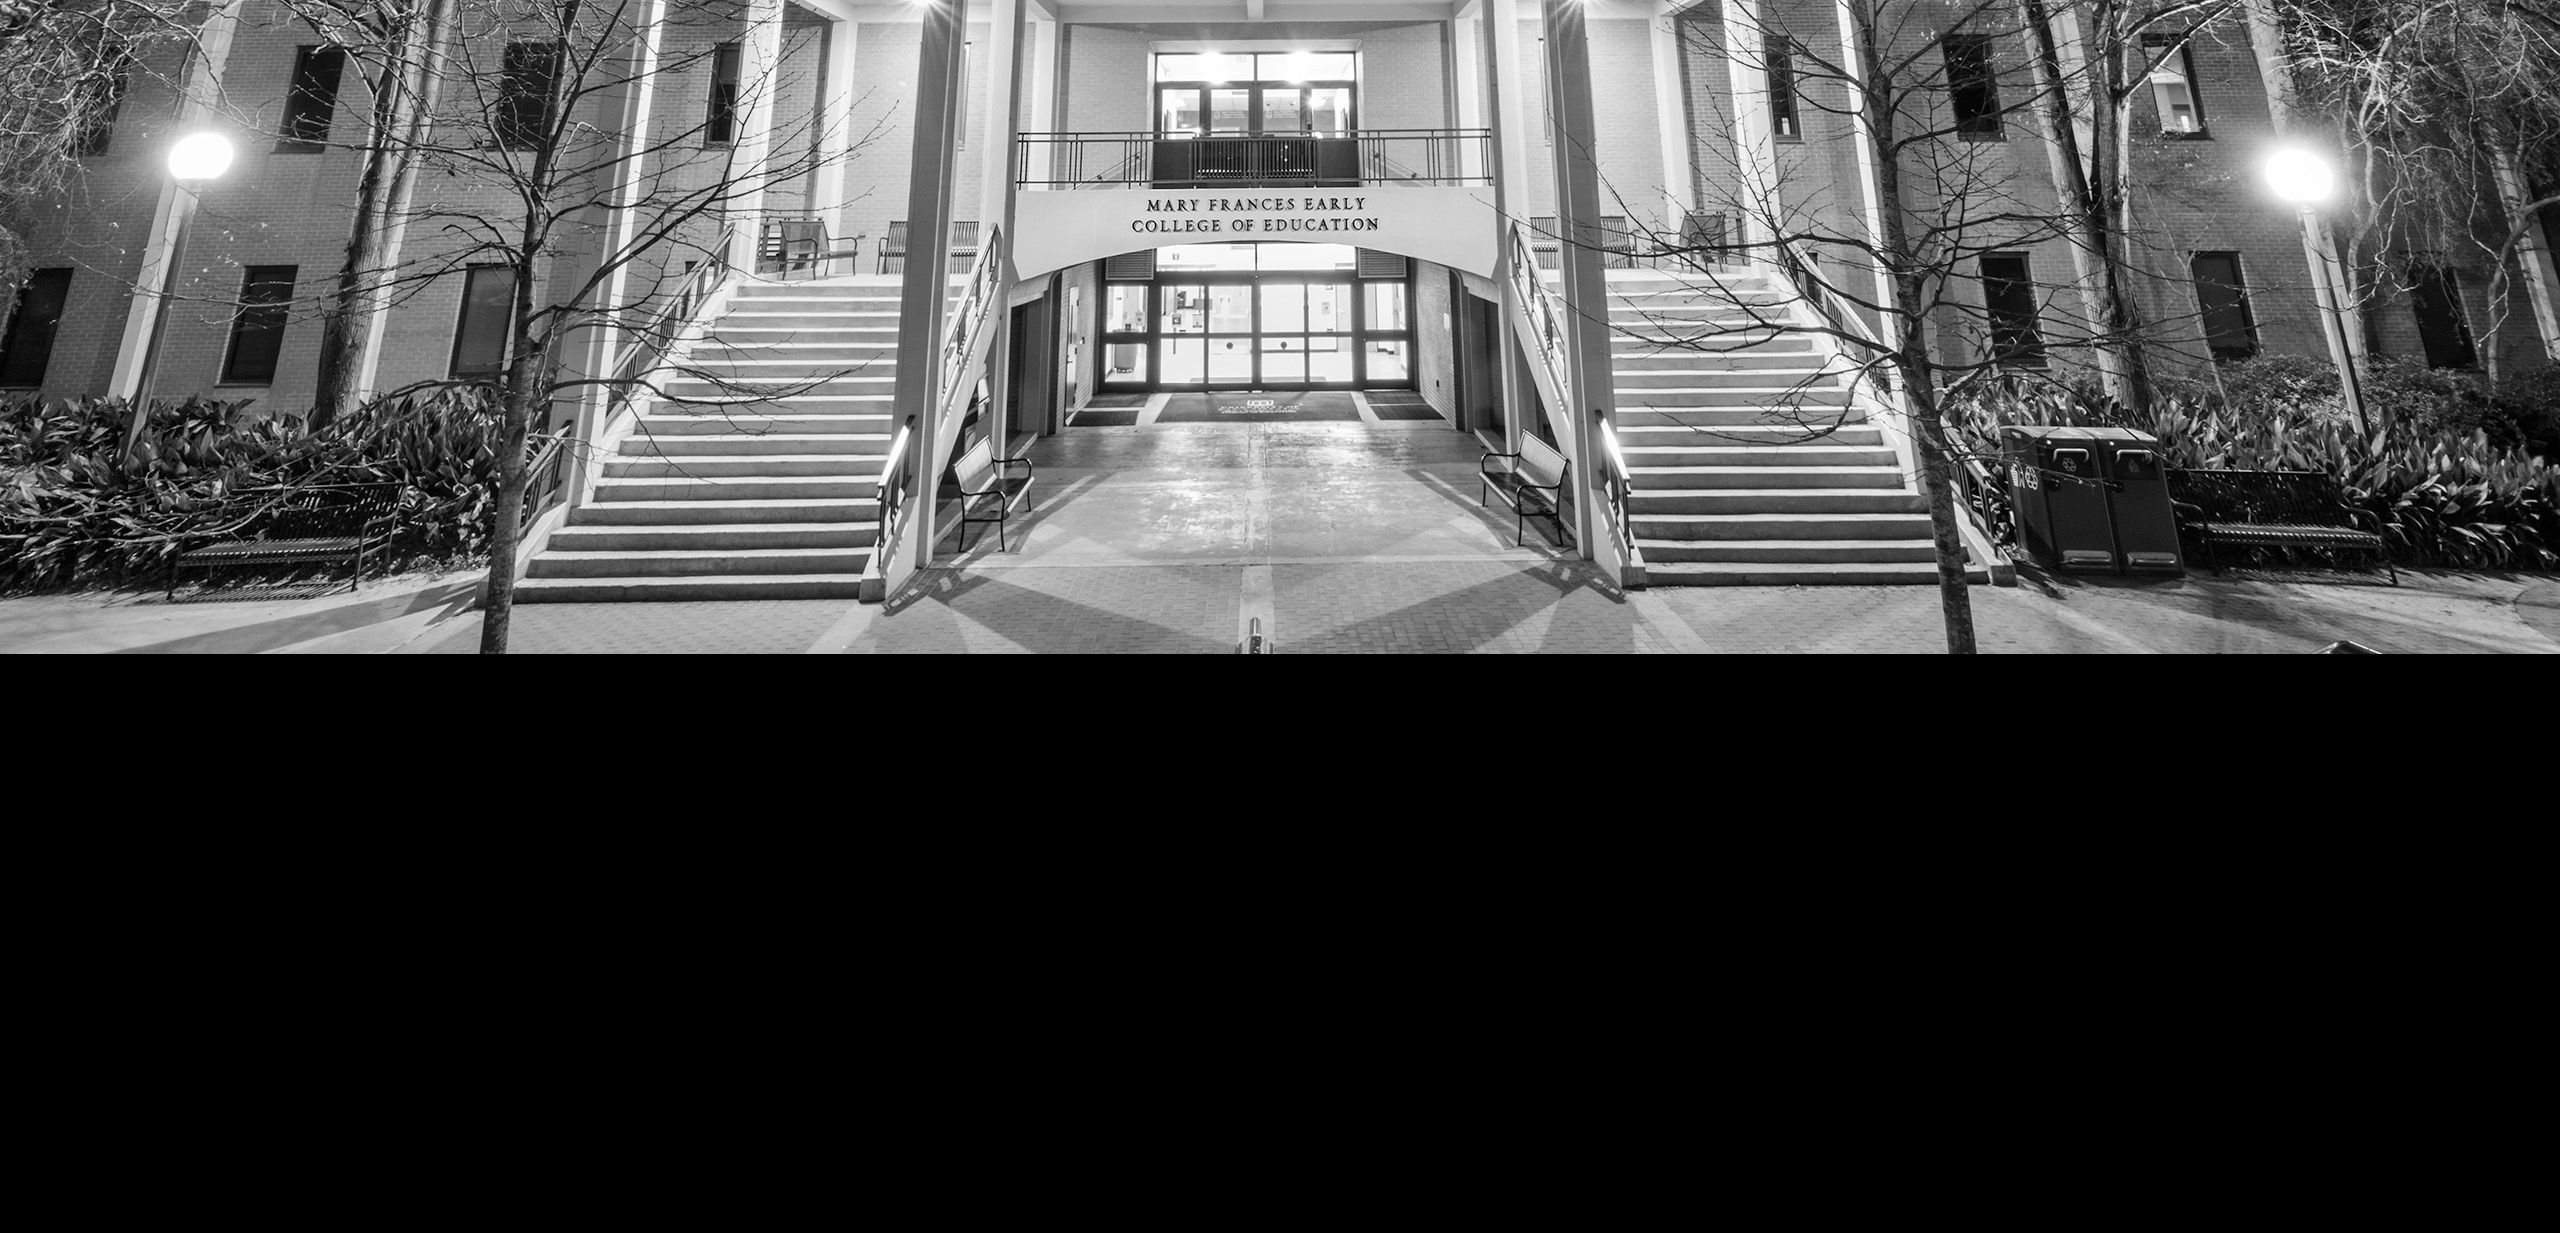 Black and white picture of the front of Mary Frances Early College of Education.